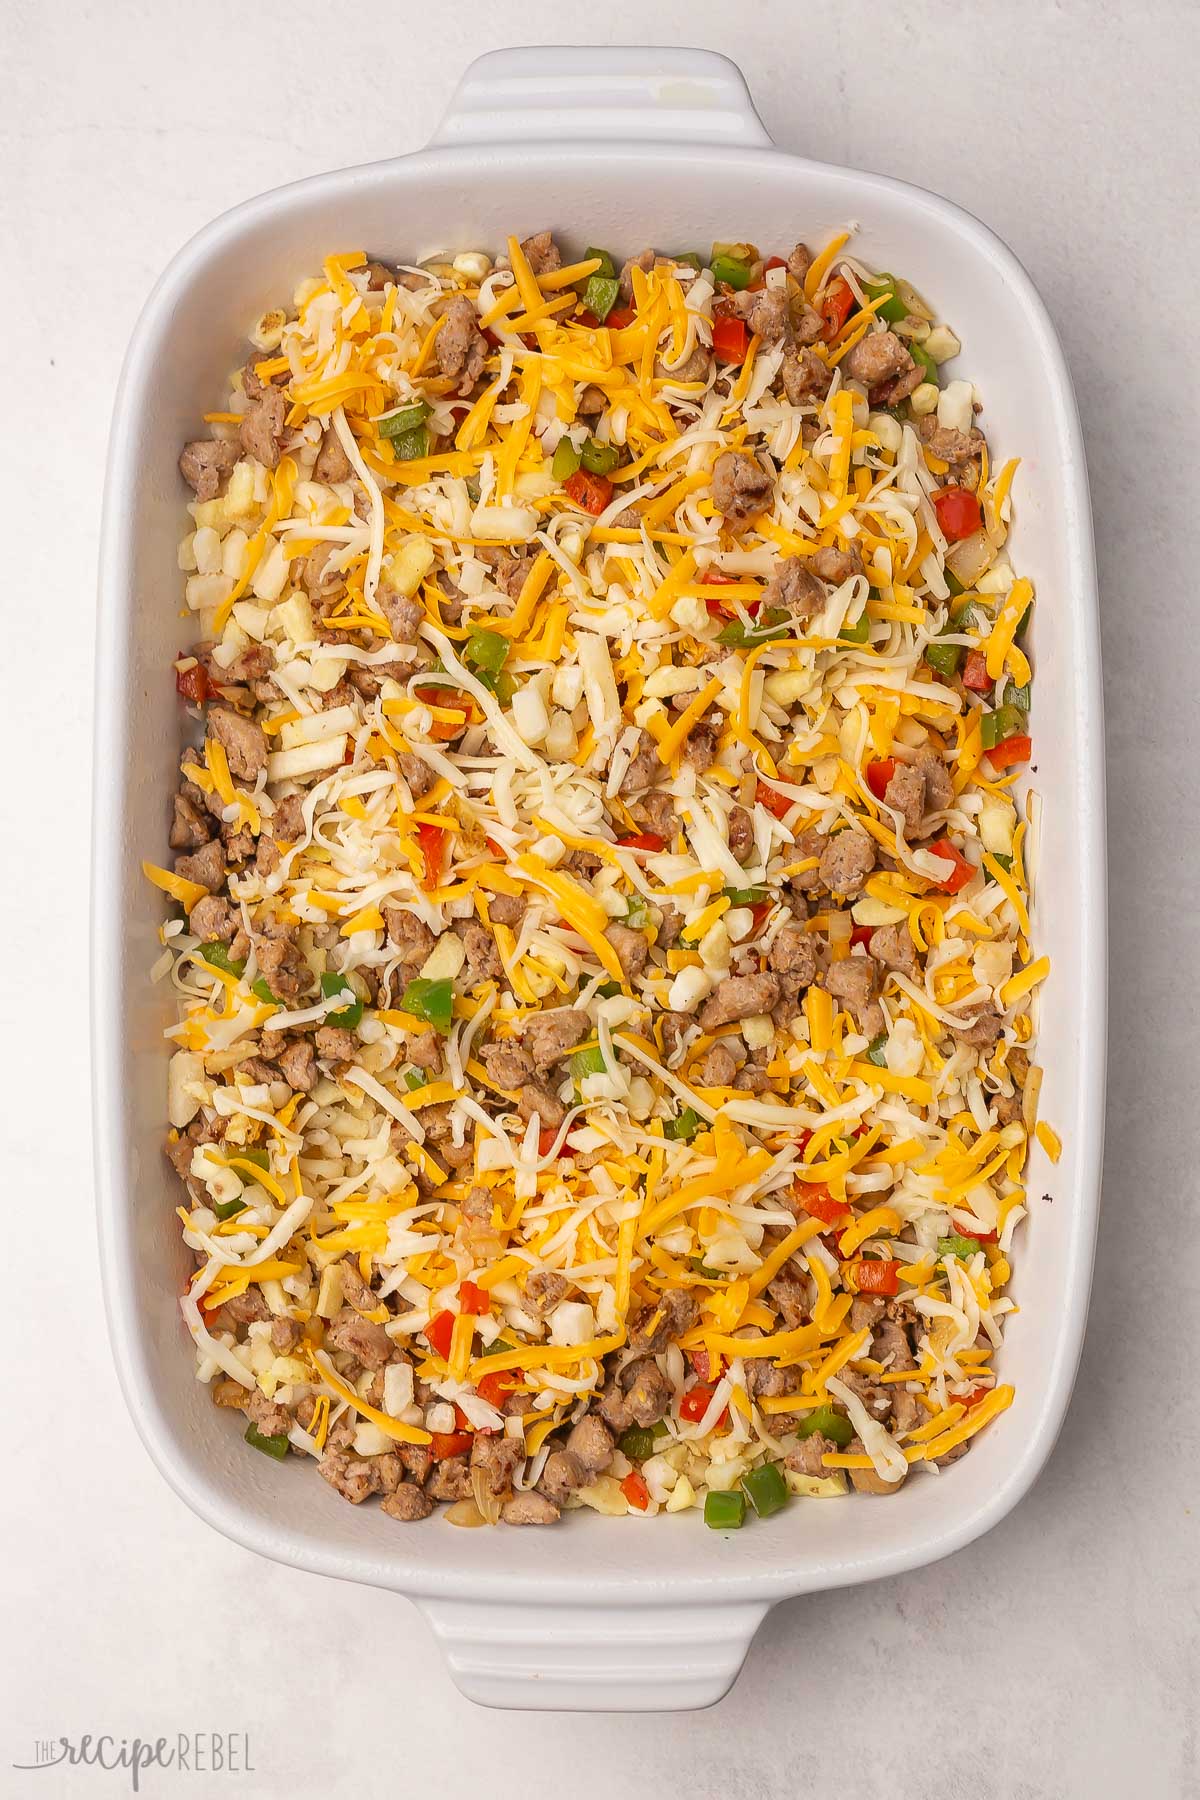 hashbrowns, sausage, vegetables, and cheese in white baking dish.